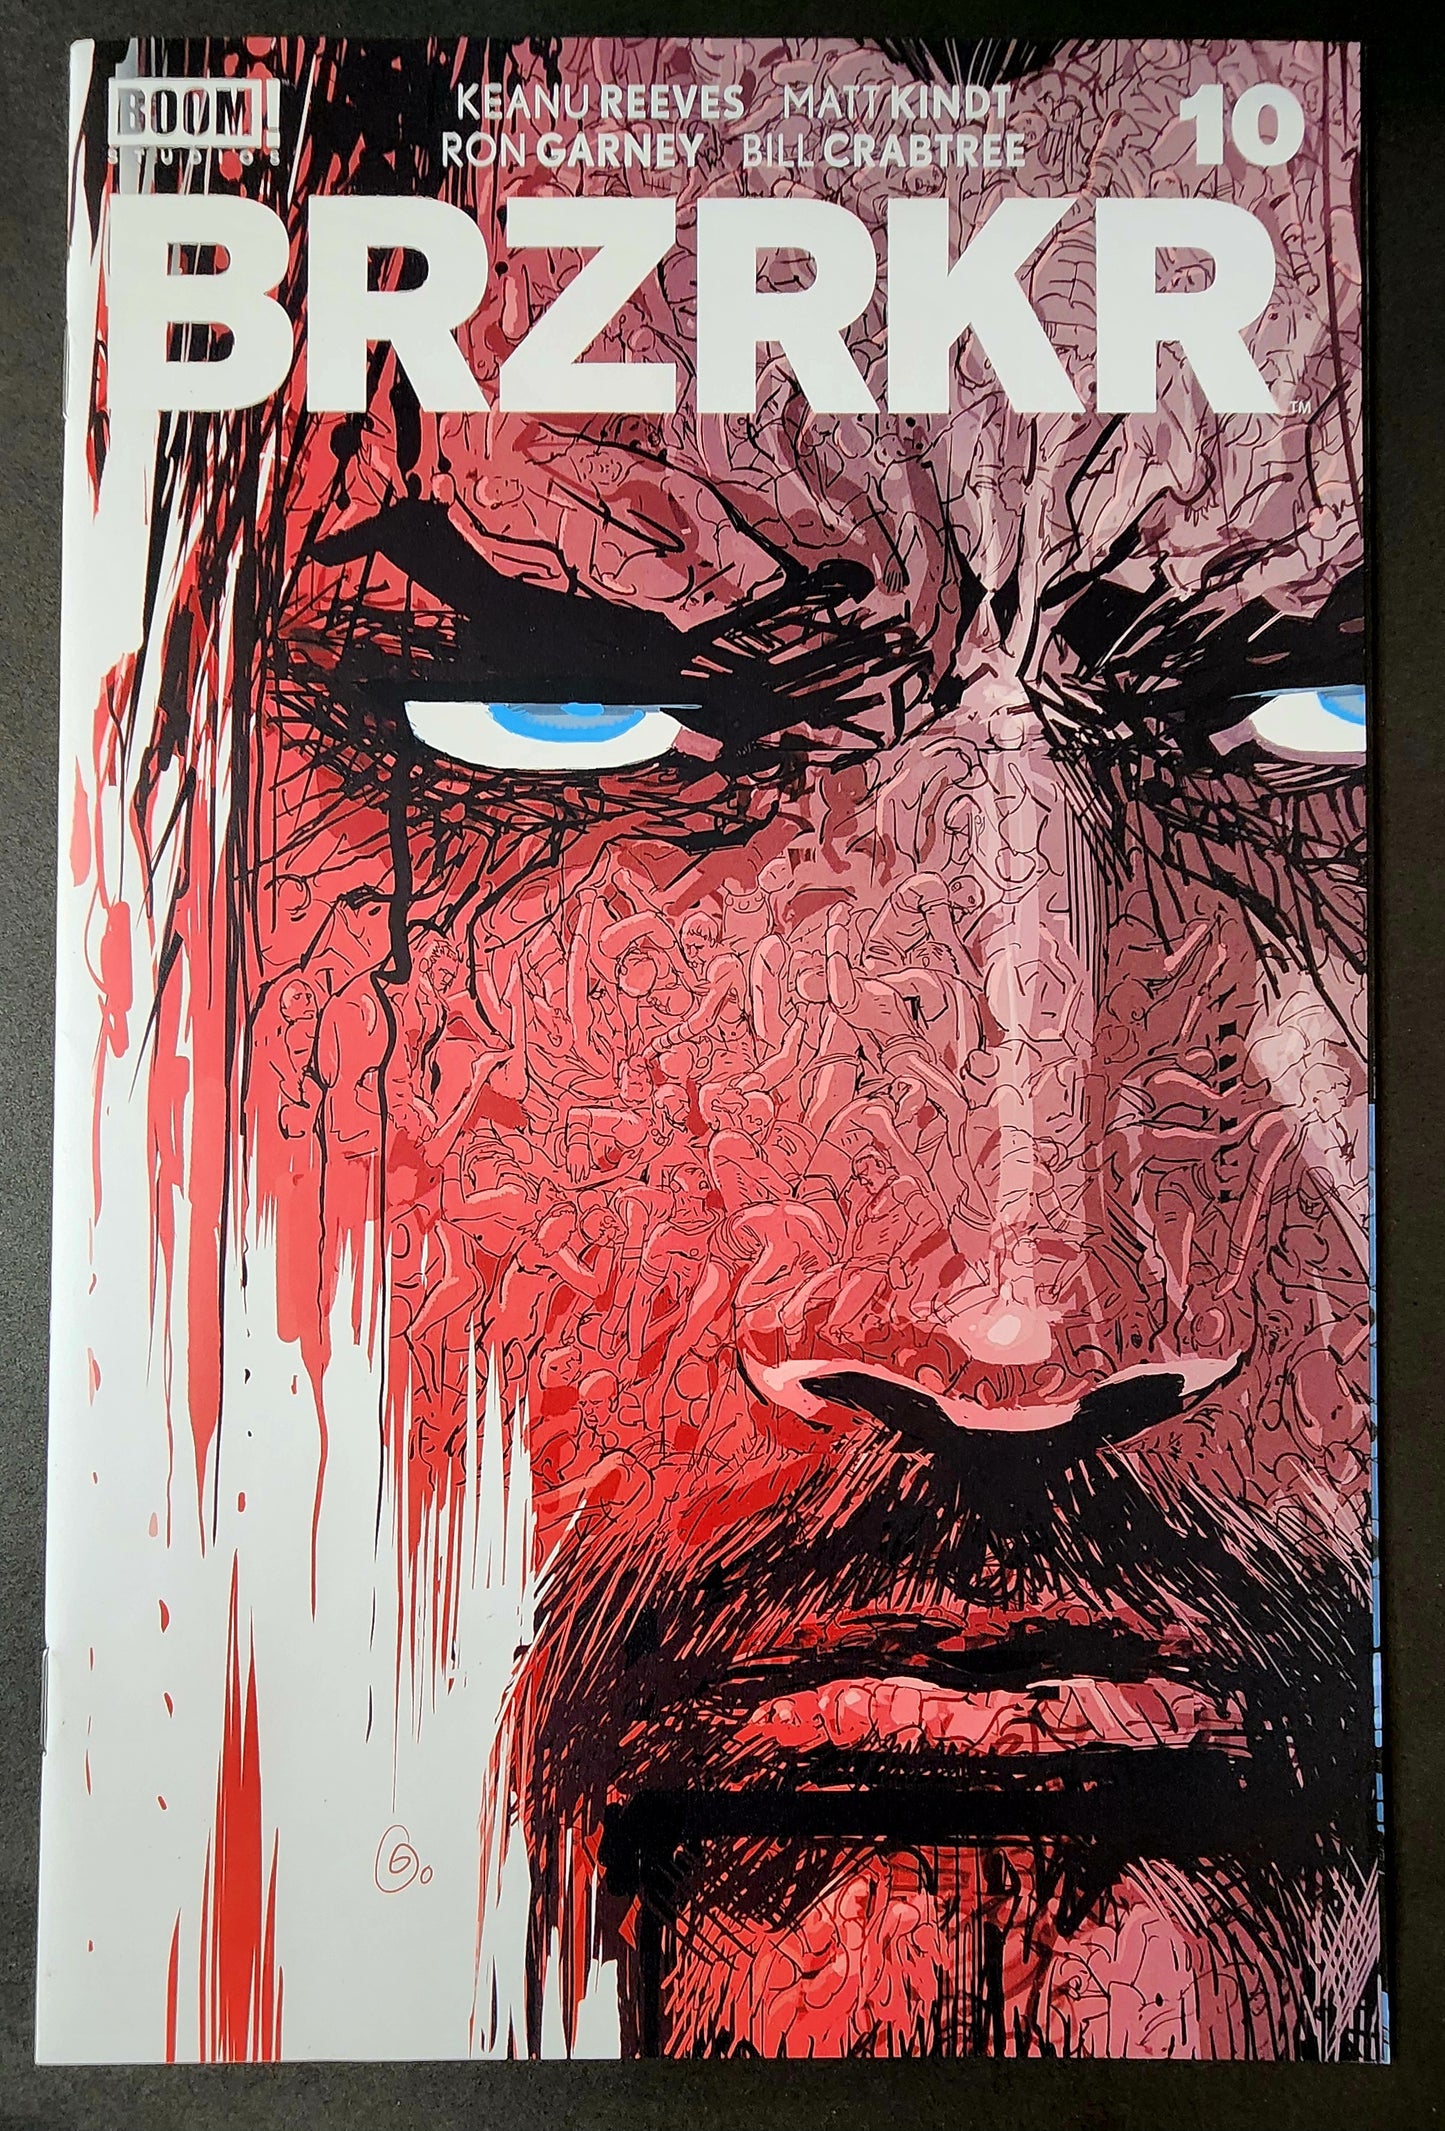 BRZRKR #10 Cover A (VF+)